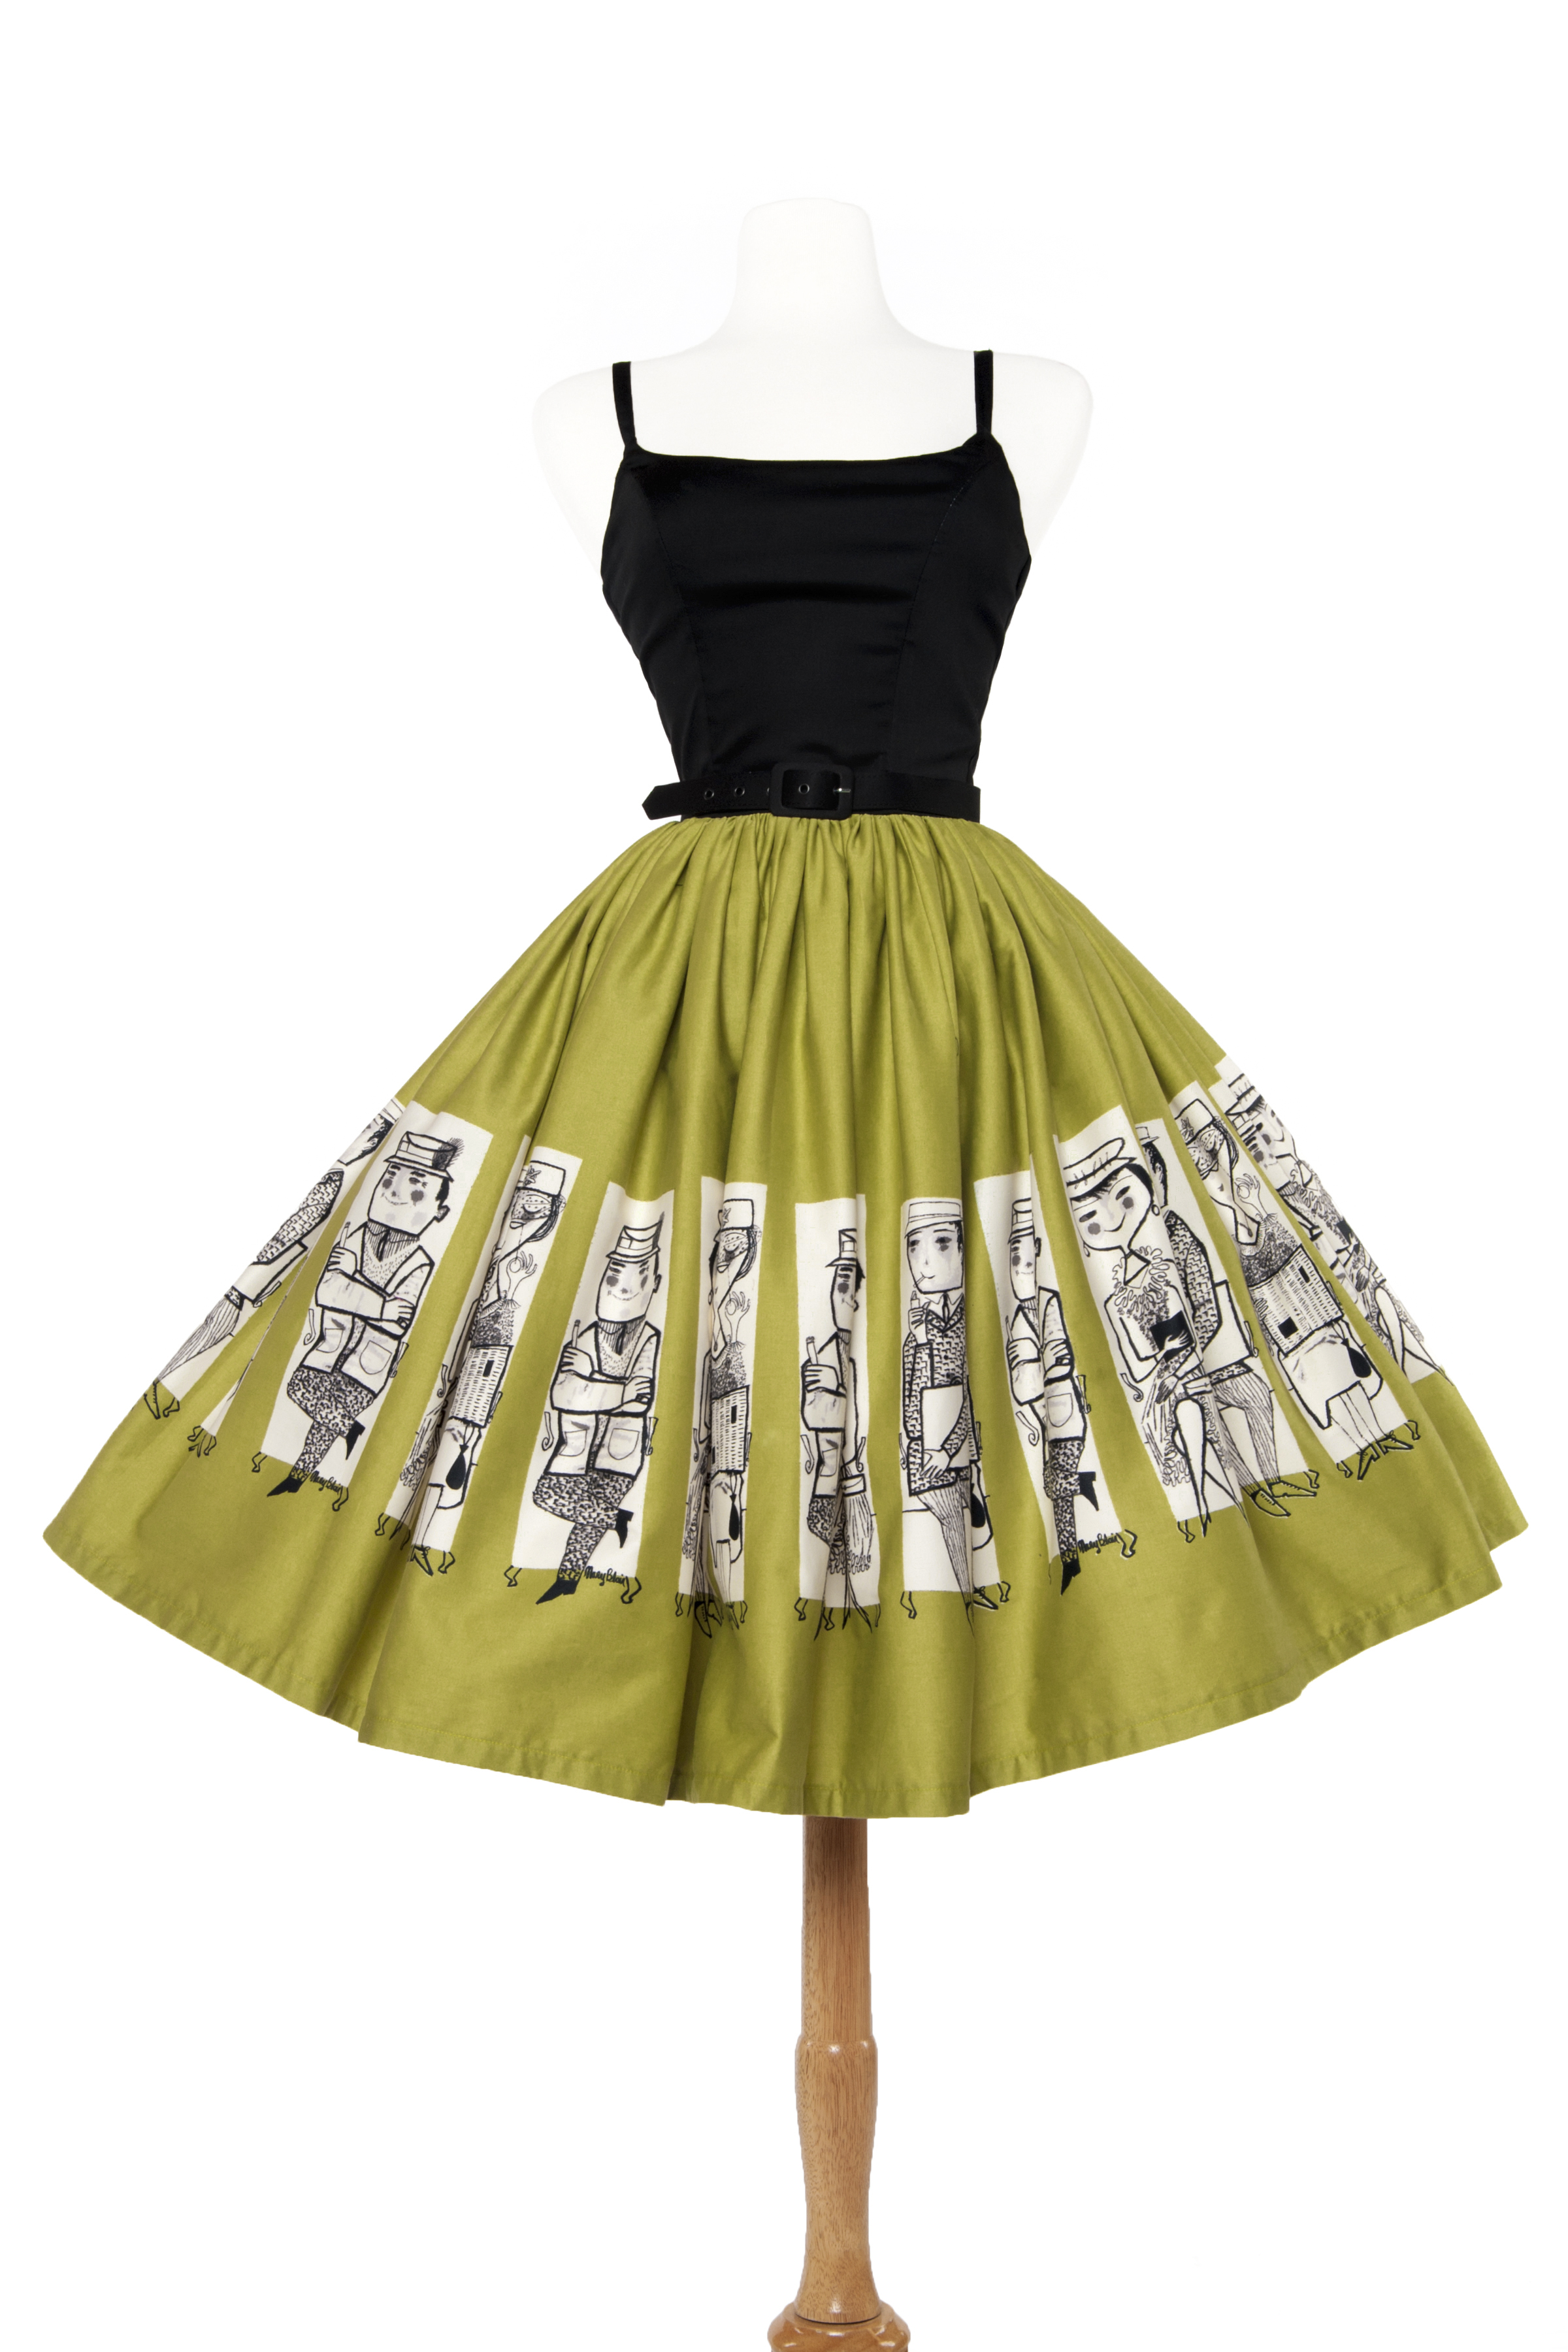 Inspired by an early 1960s day dress design, the Jenny Dress is a flirty sundress that has wonderful structure. Featuring the fun Commuters print from Mary Blair in olive, black, and white.